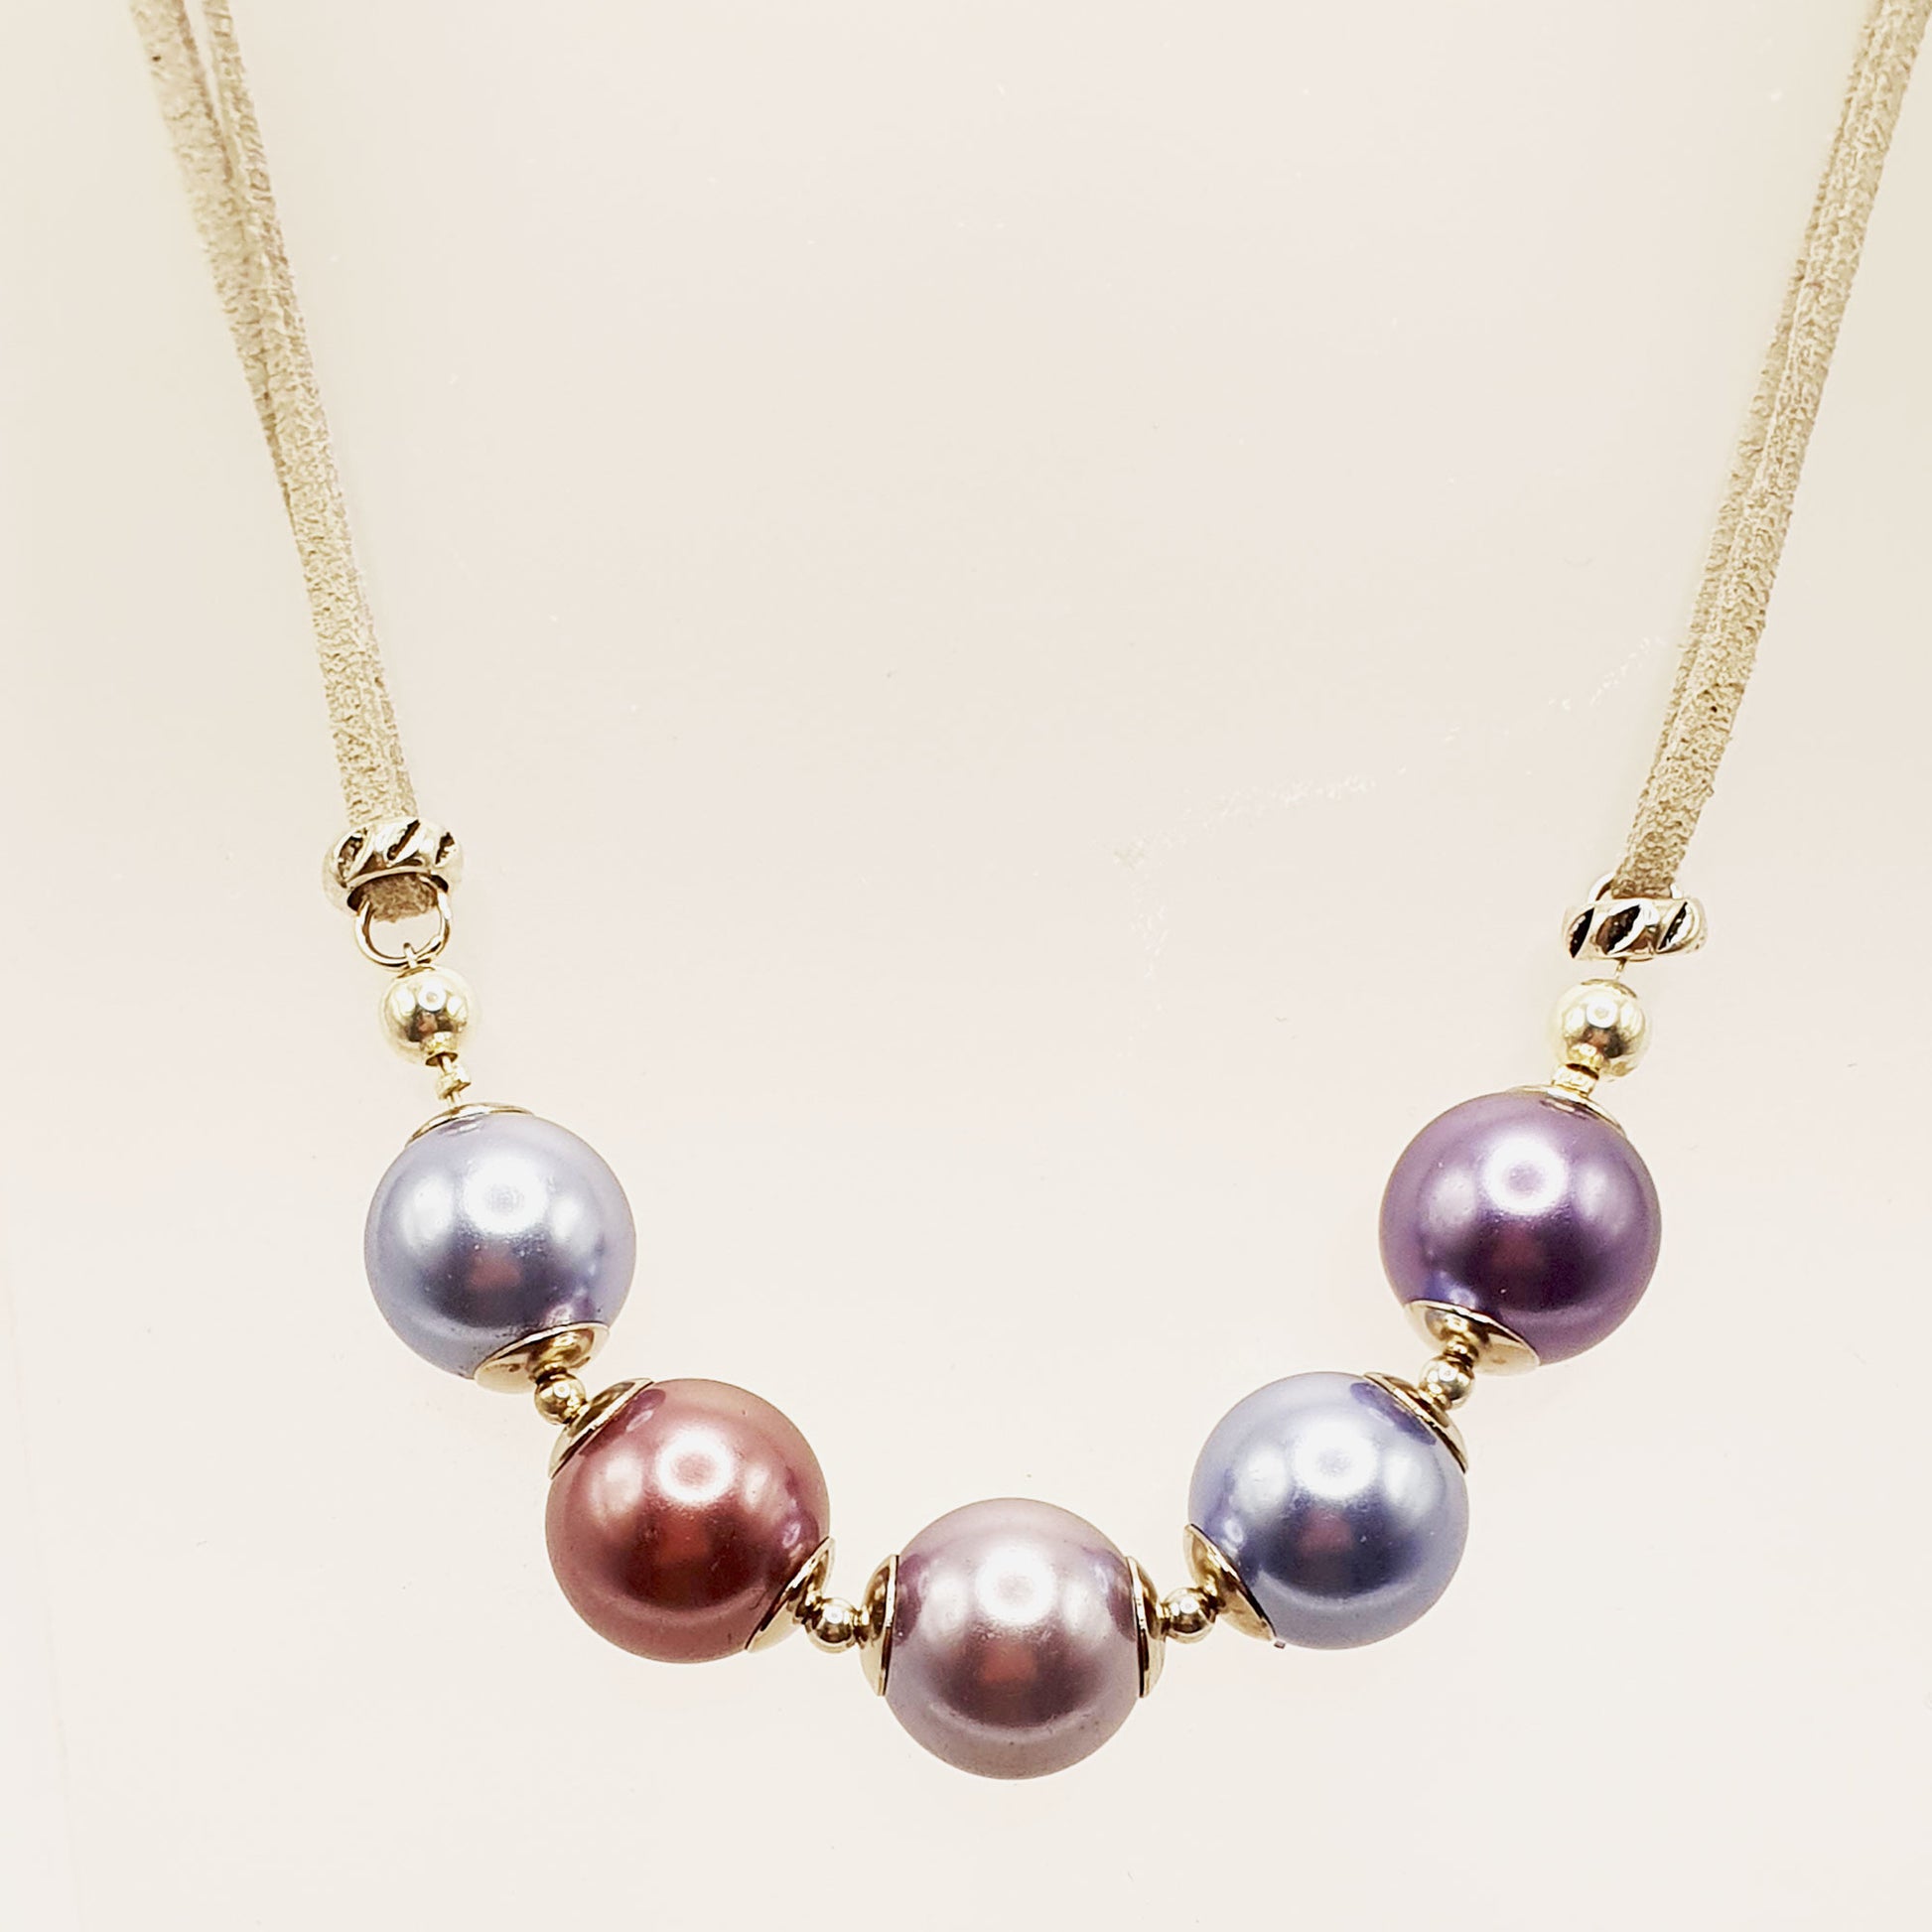 Glass pearl crescent necklace in purple and bronze tones